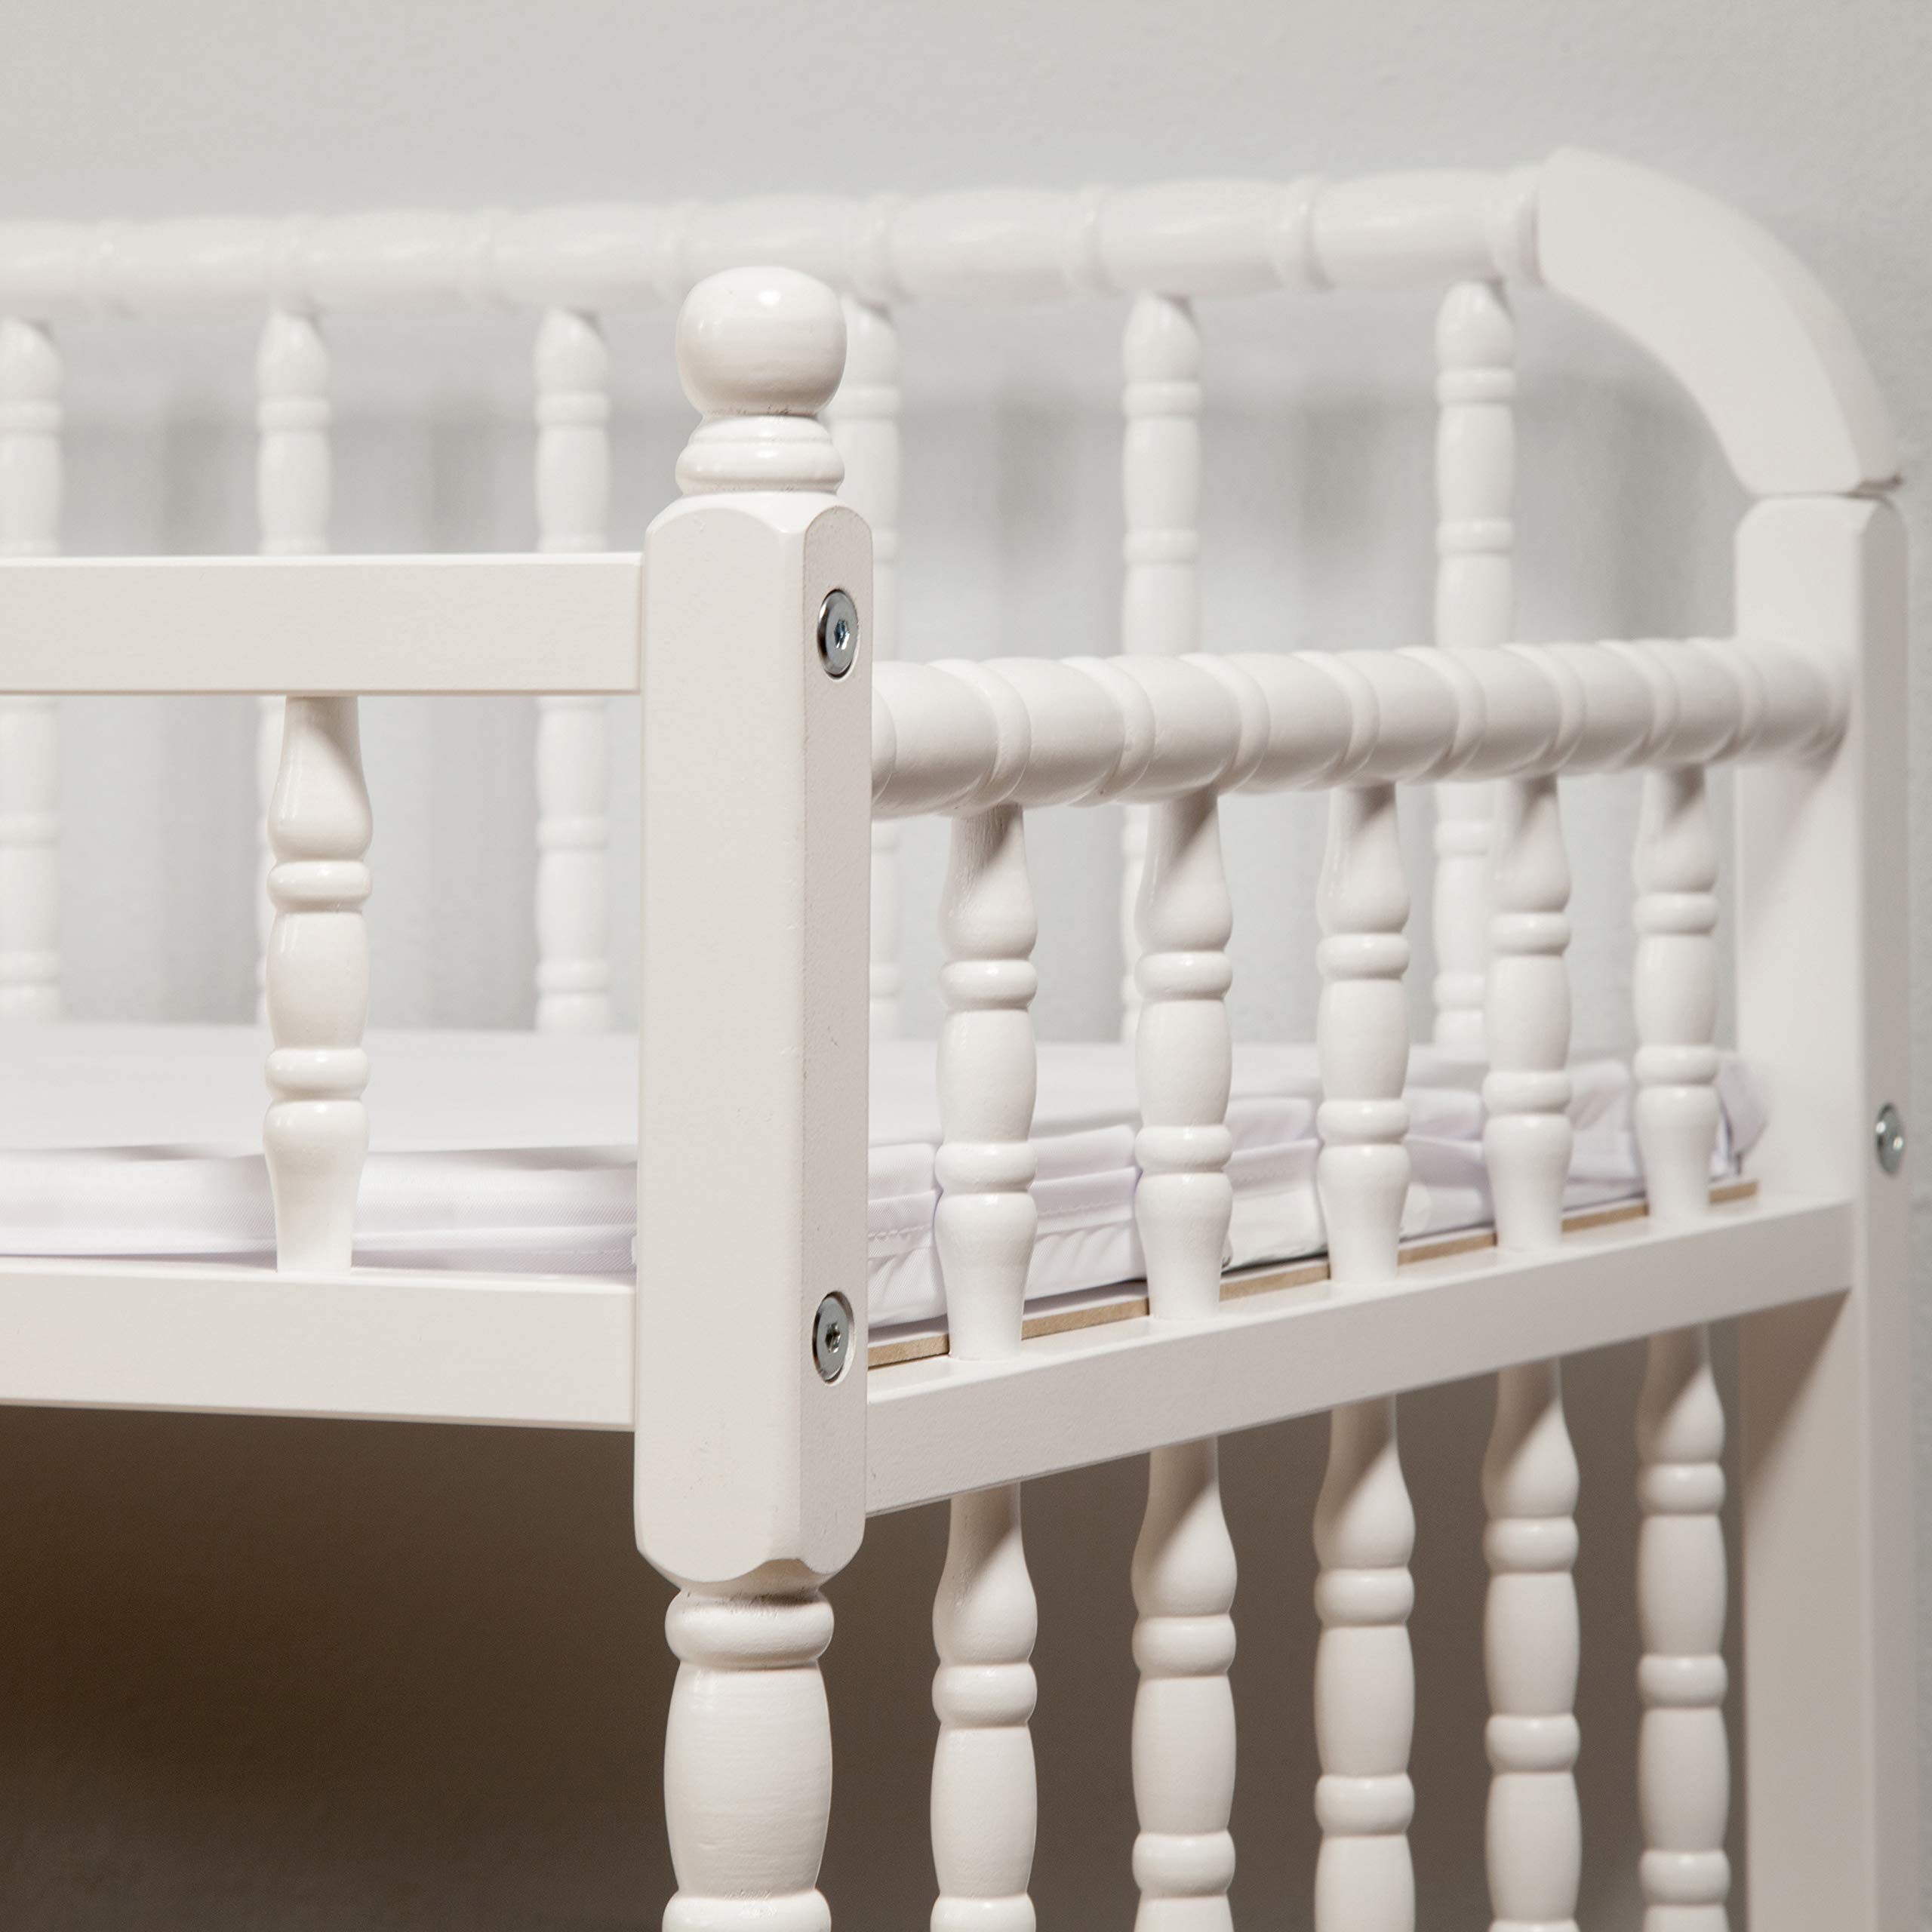 DaVinci Jenny Lind Changing Table with Pad in White